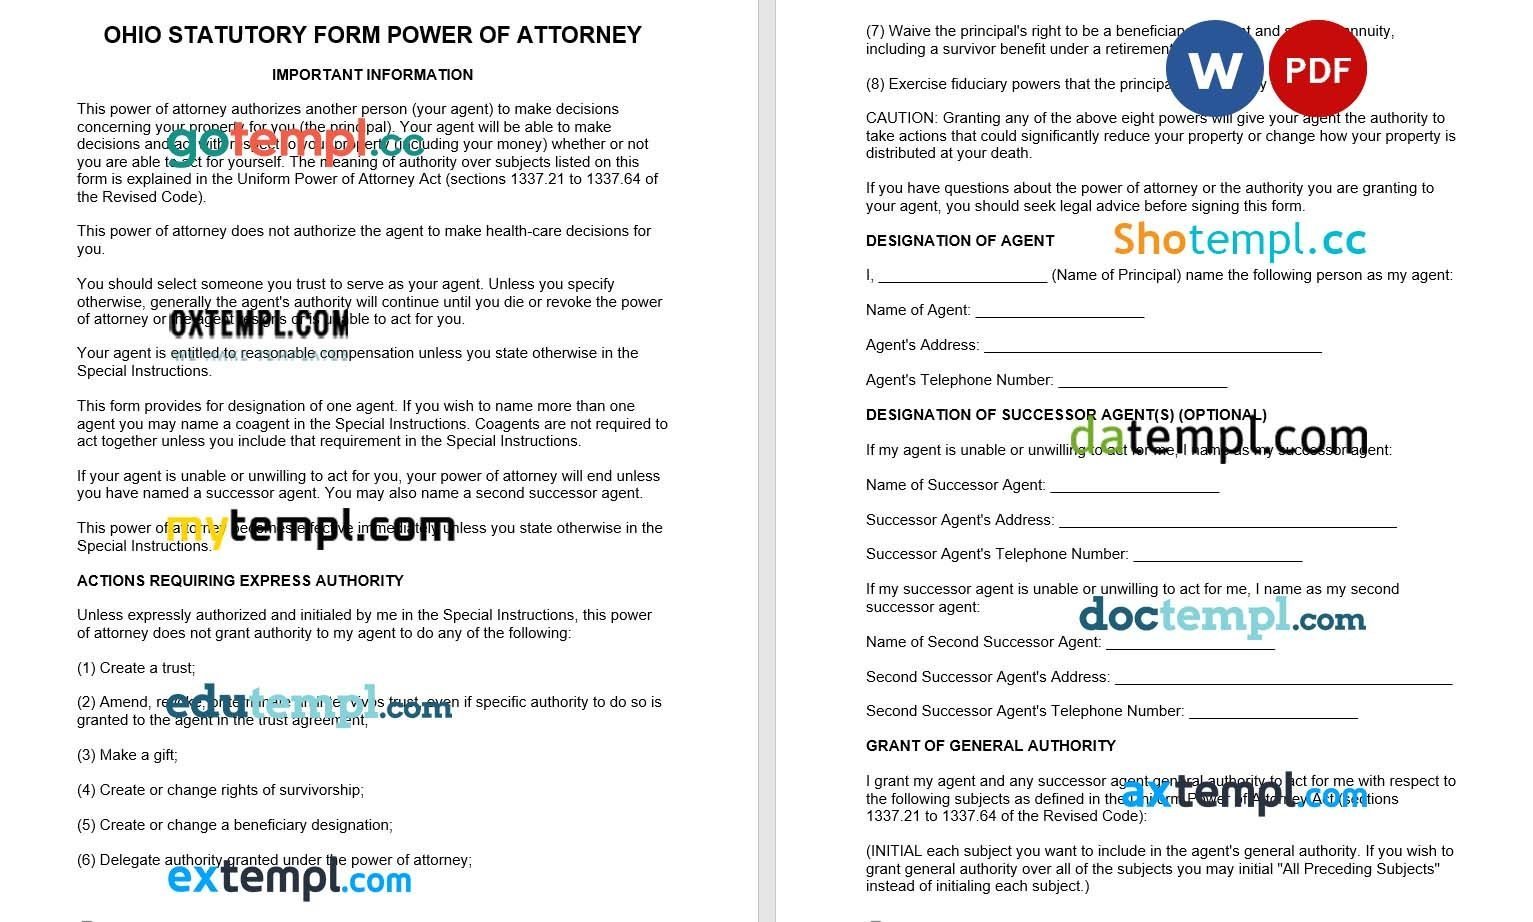 Ohio Statutory Durable Power of Attorney Form example, fully editable